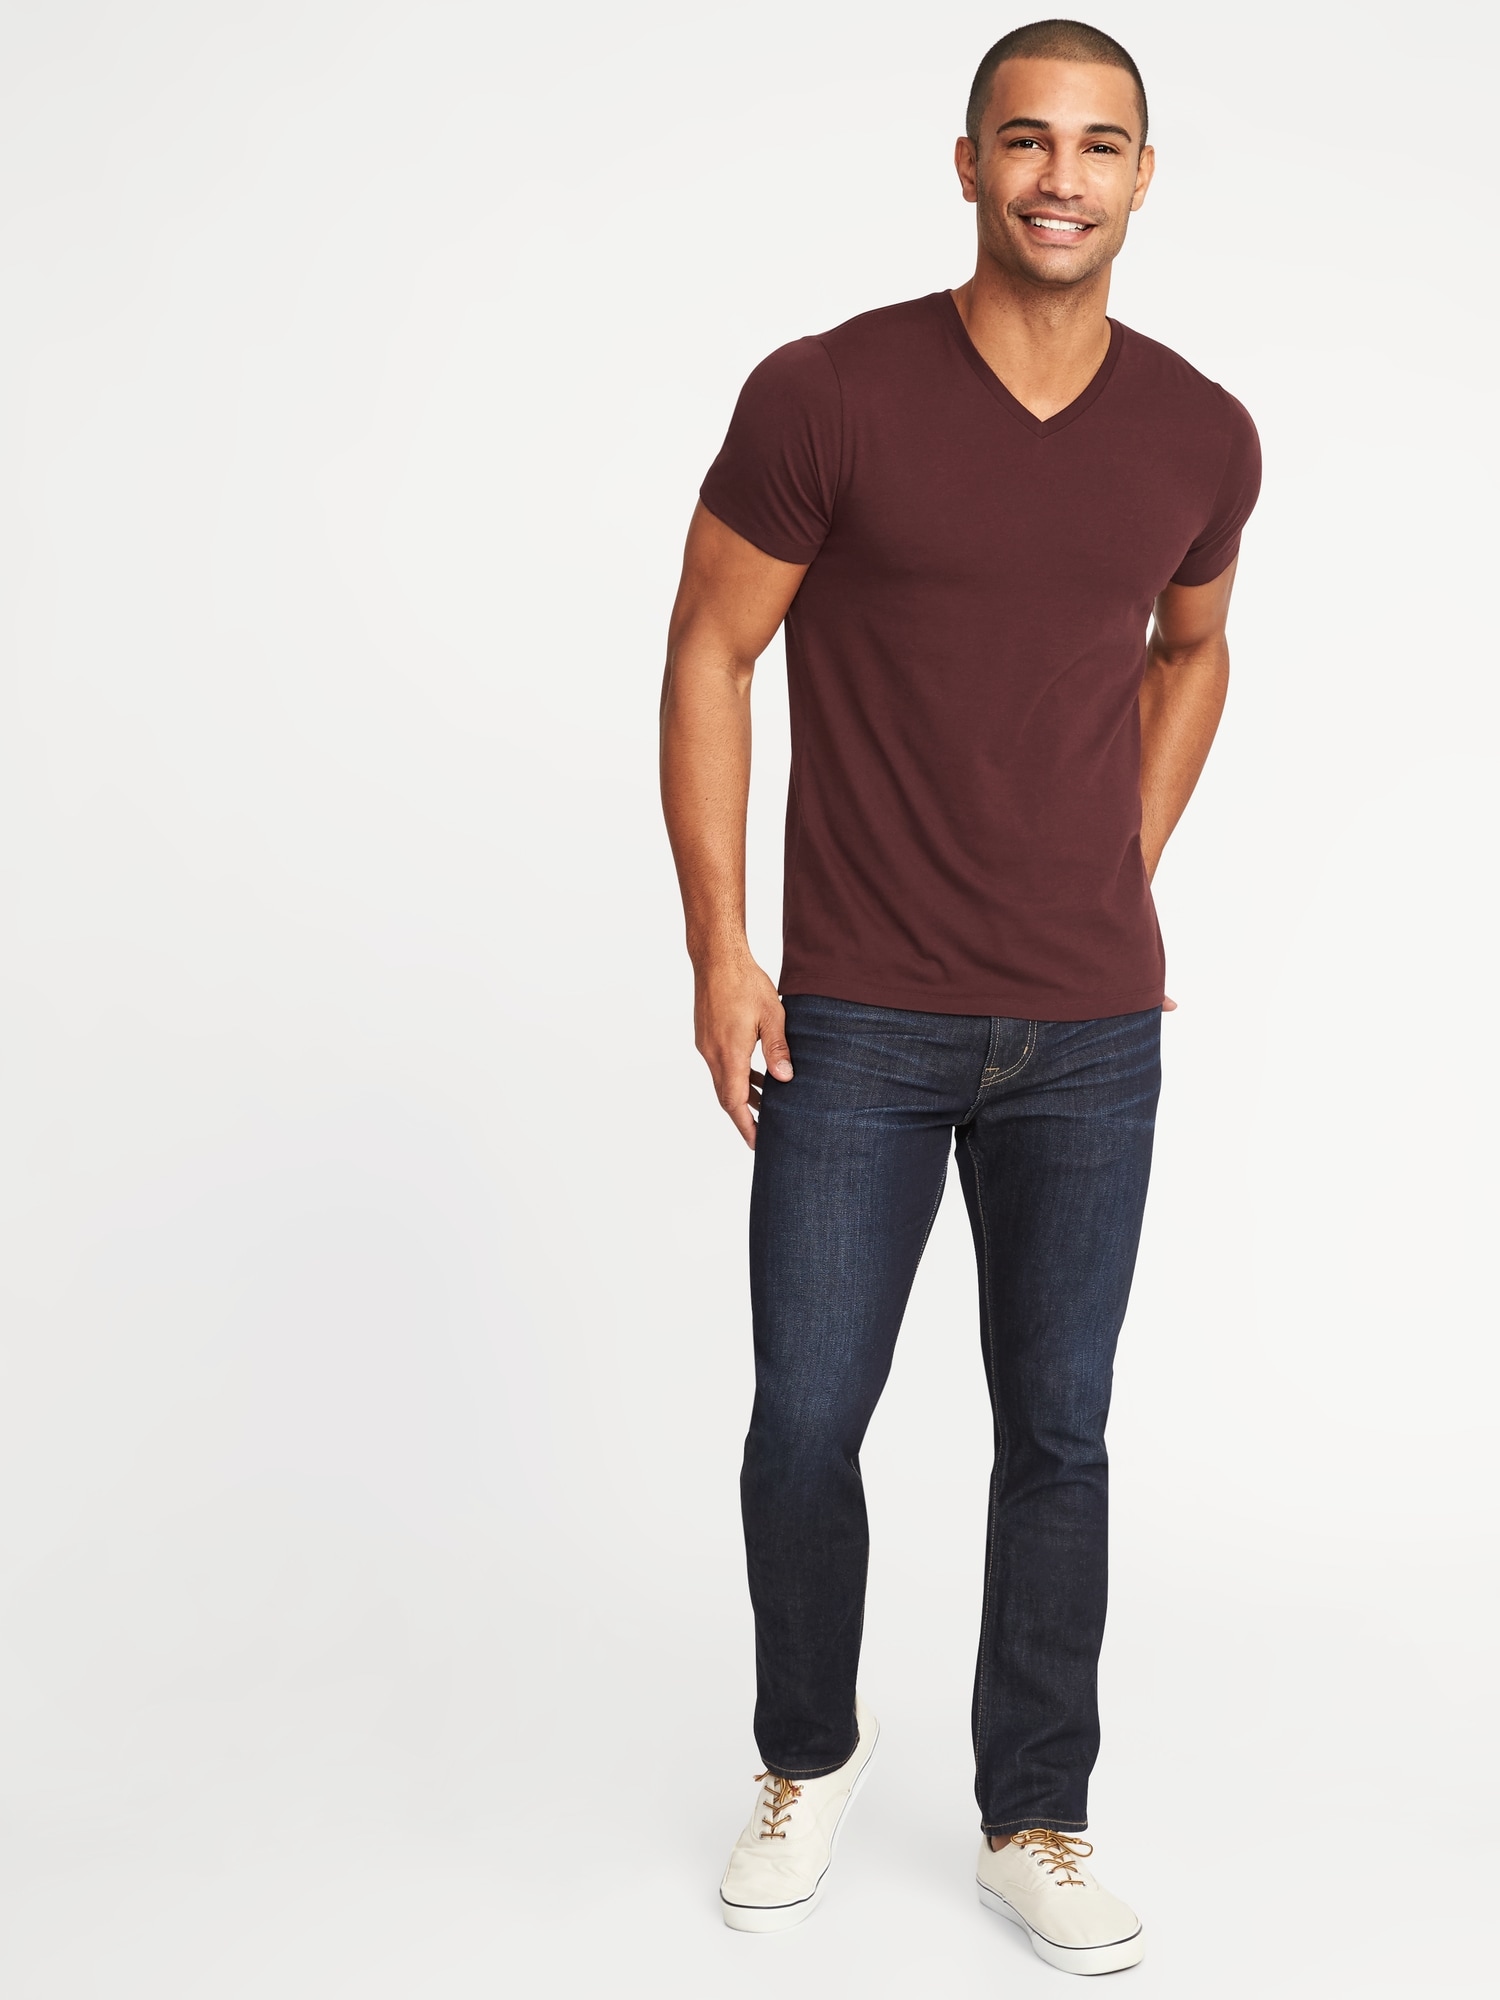 Soft-Washed Perfect-Fit V-Neck Tee for Men | Old Navy